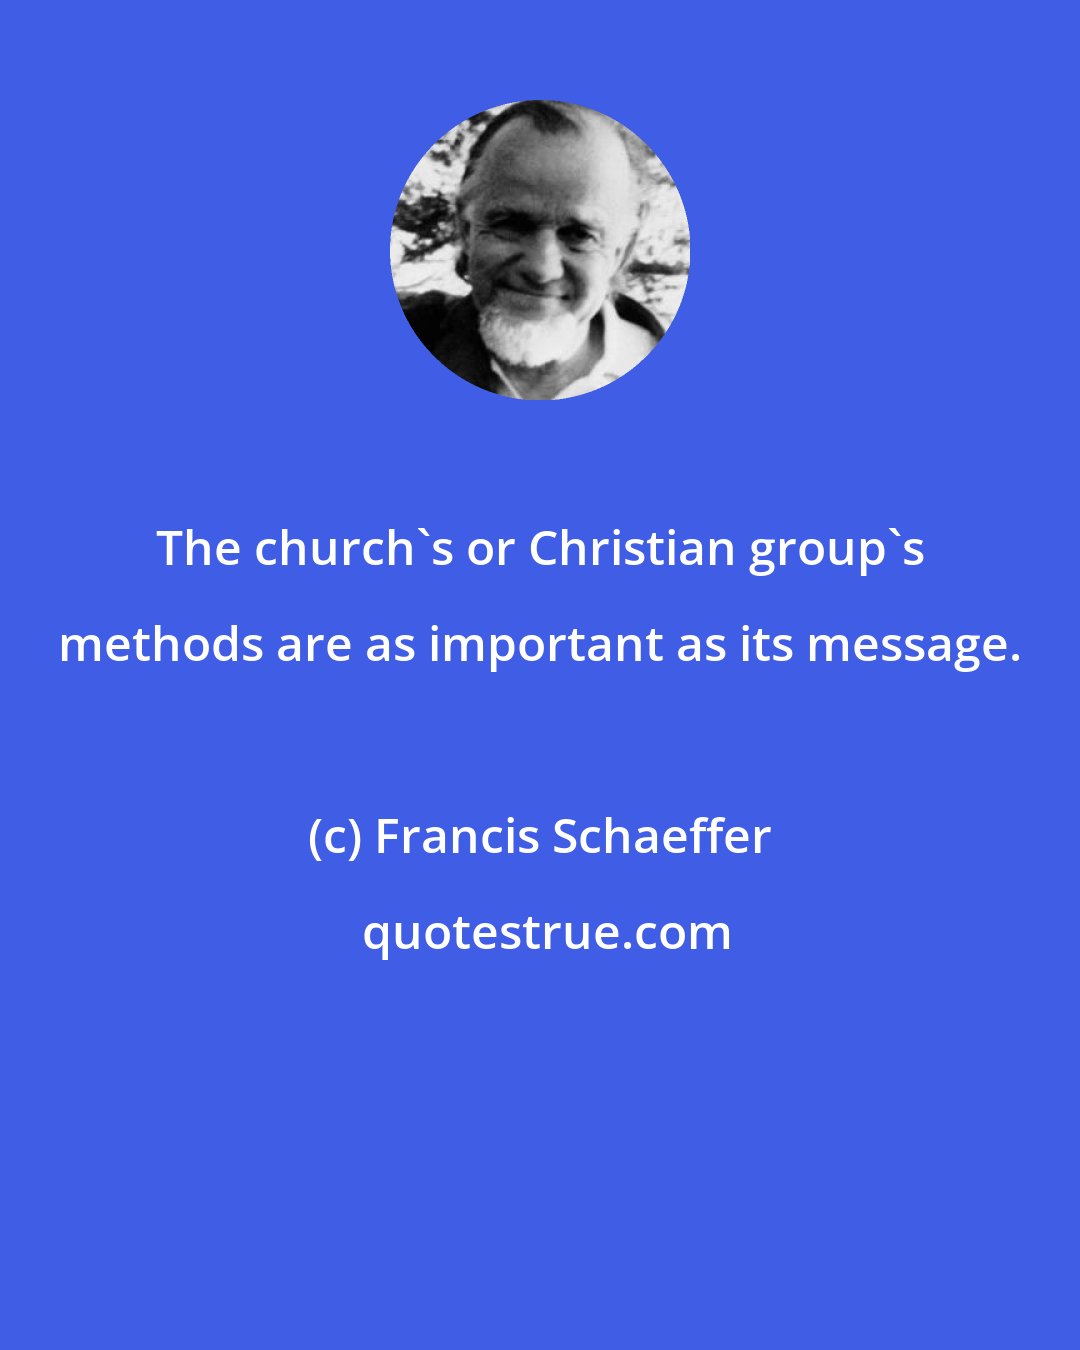 Francis Schaeffer: The church's or Christian group's methods are as important as its message.